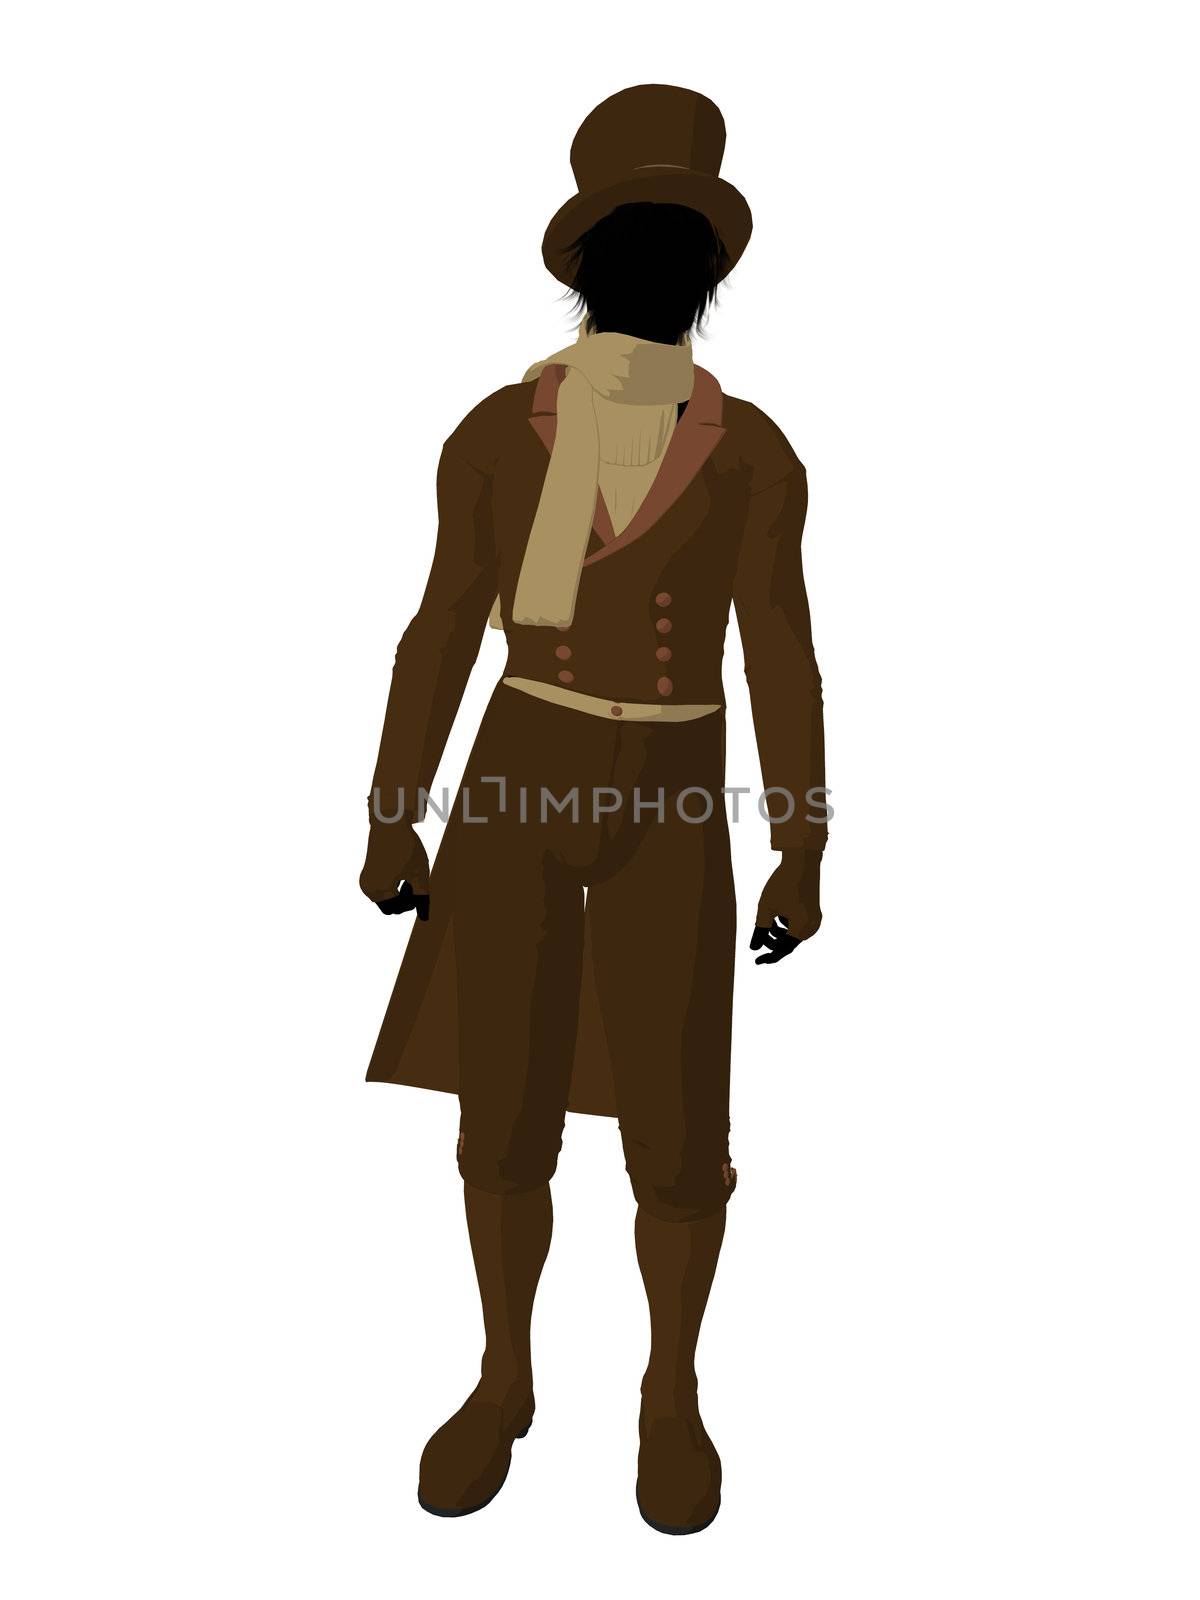 Victorian Man Illustration Silhouette by kathygold